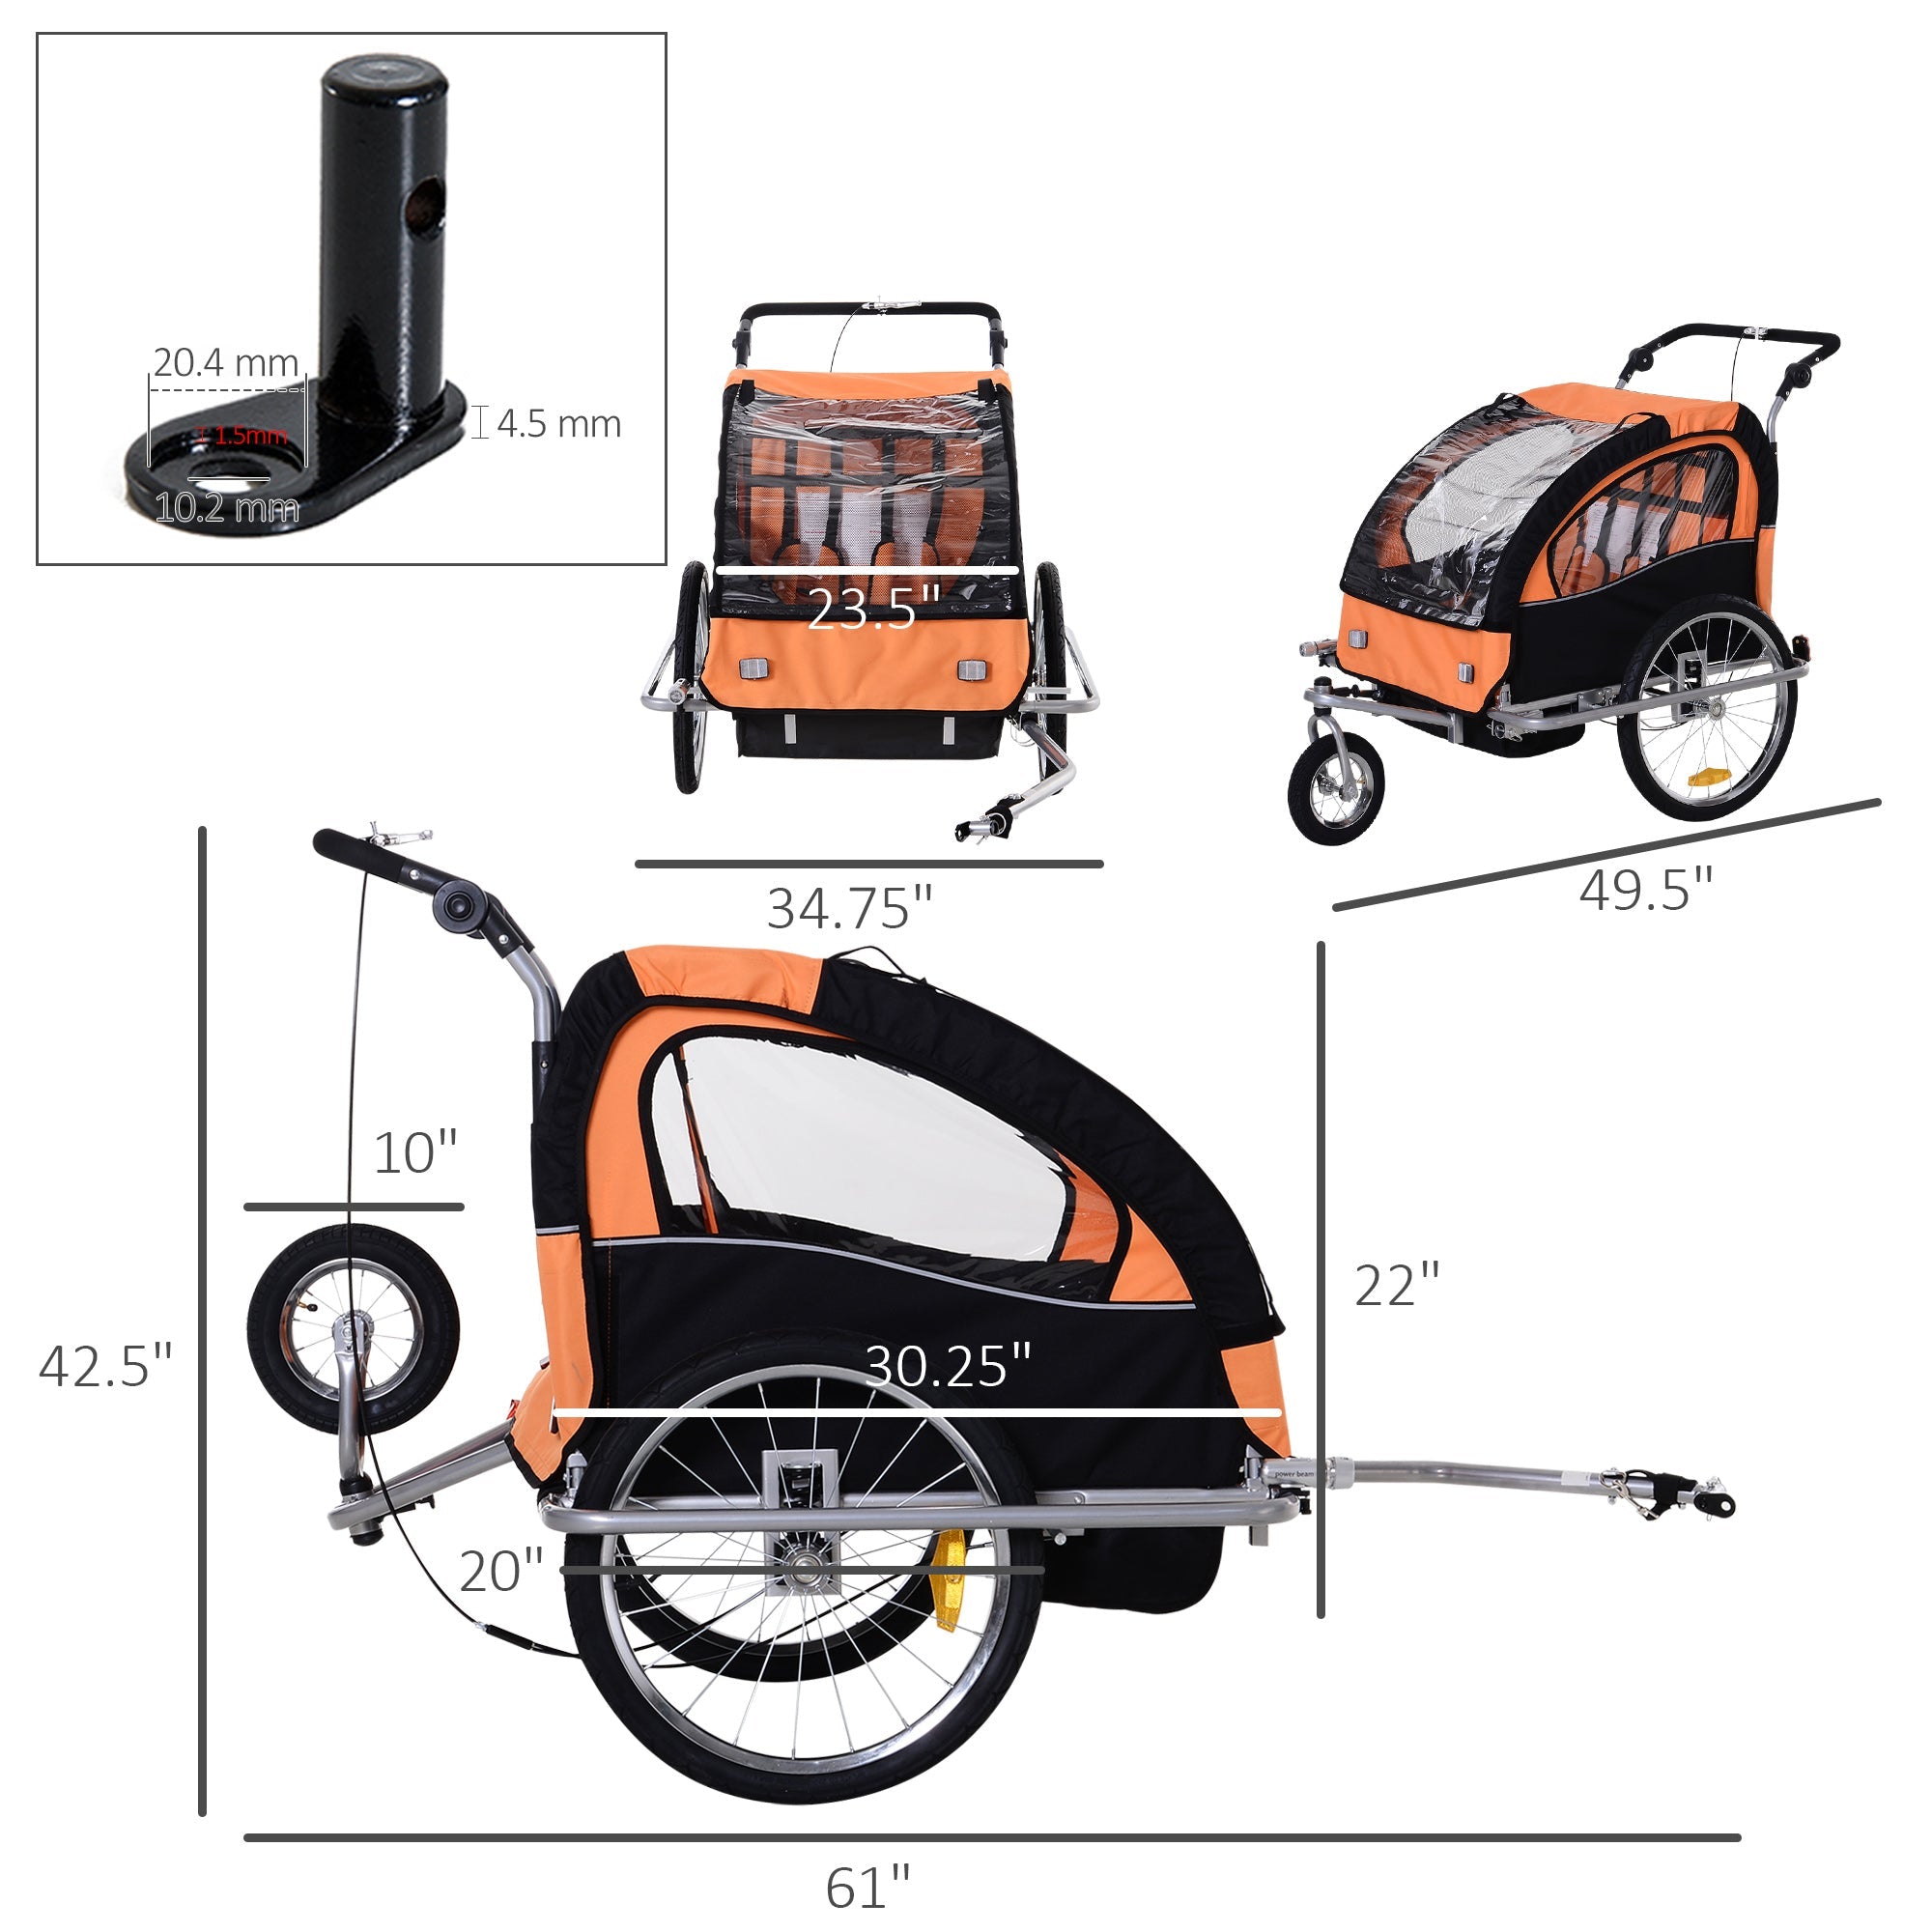 Elite 360 Swivel Bike Trailer for Kids Double Child Two-Wheel Bicycle Cargo Trailer With 2 Security Harnesses, Orange